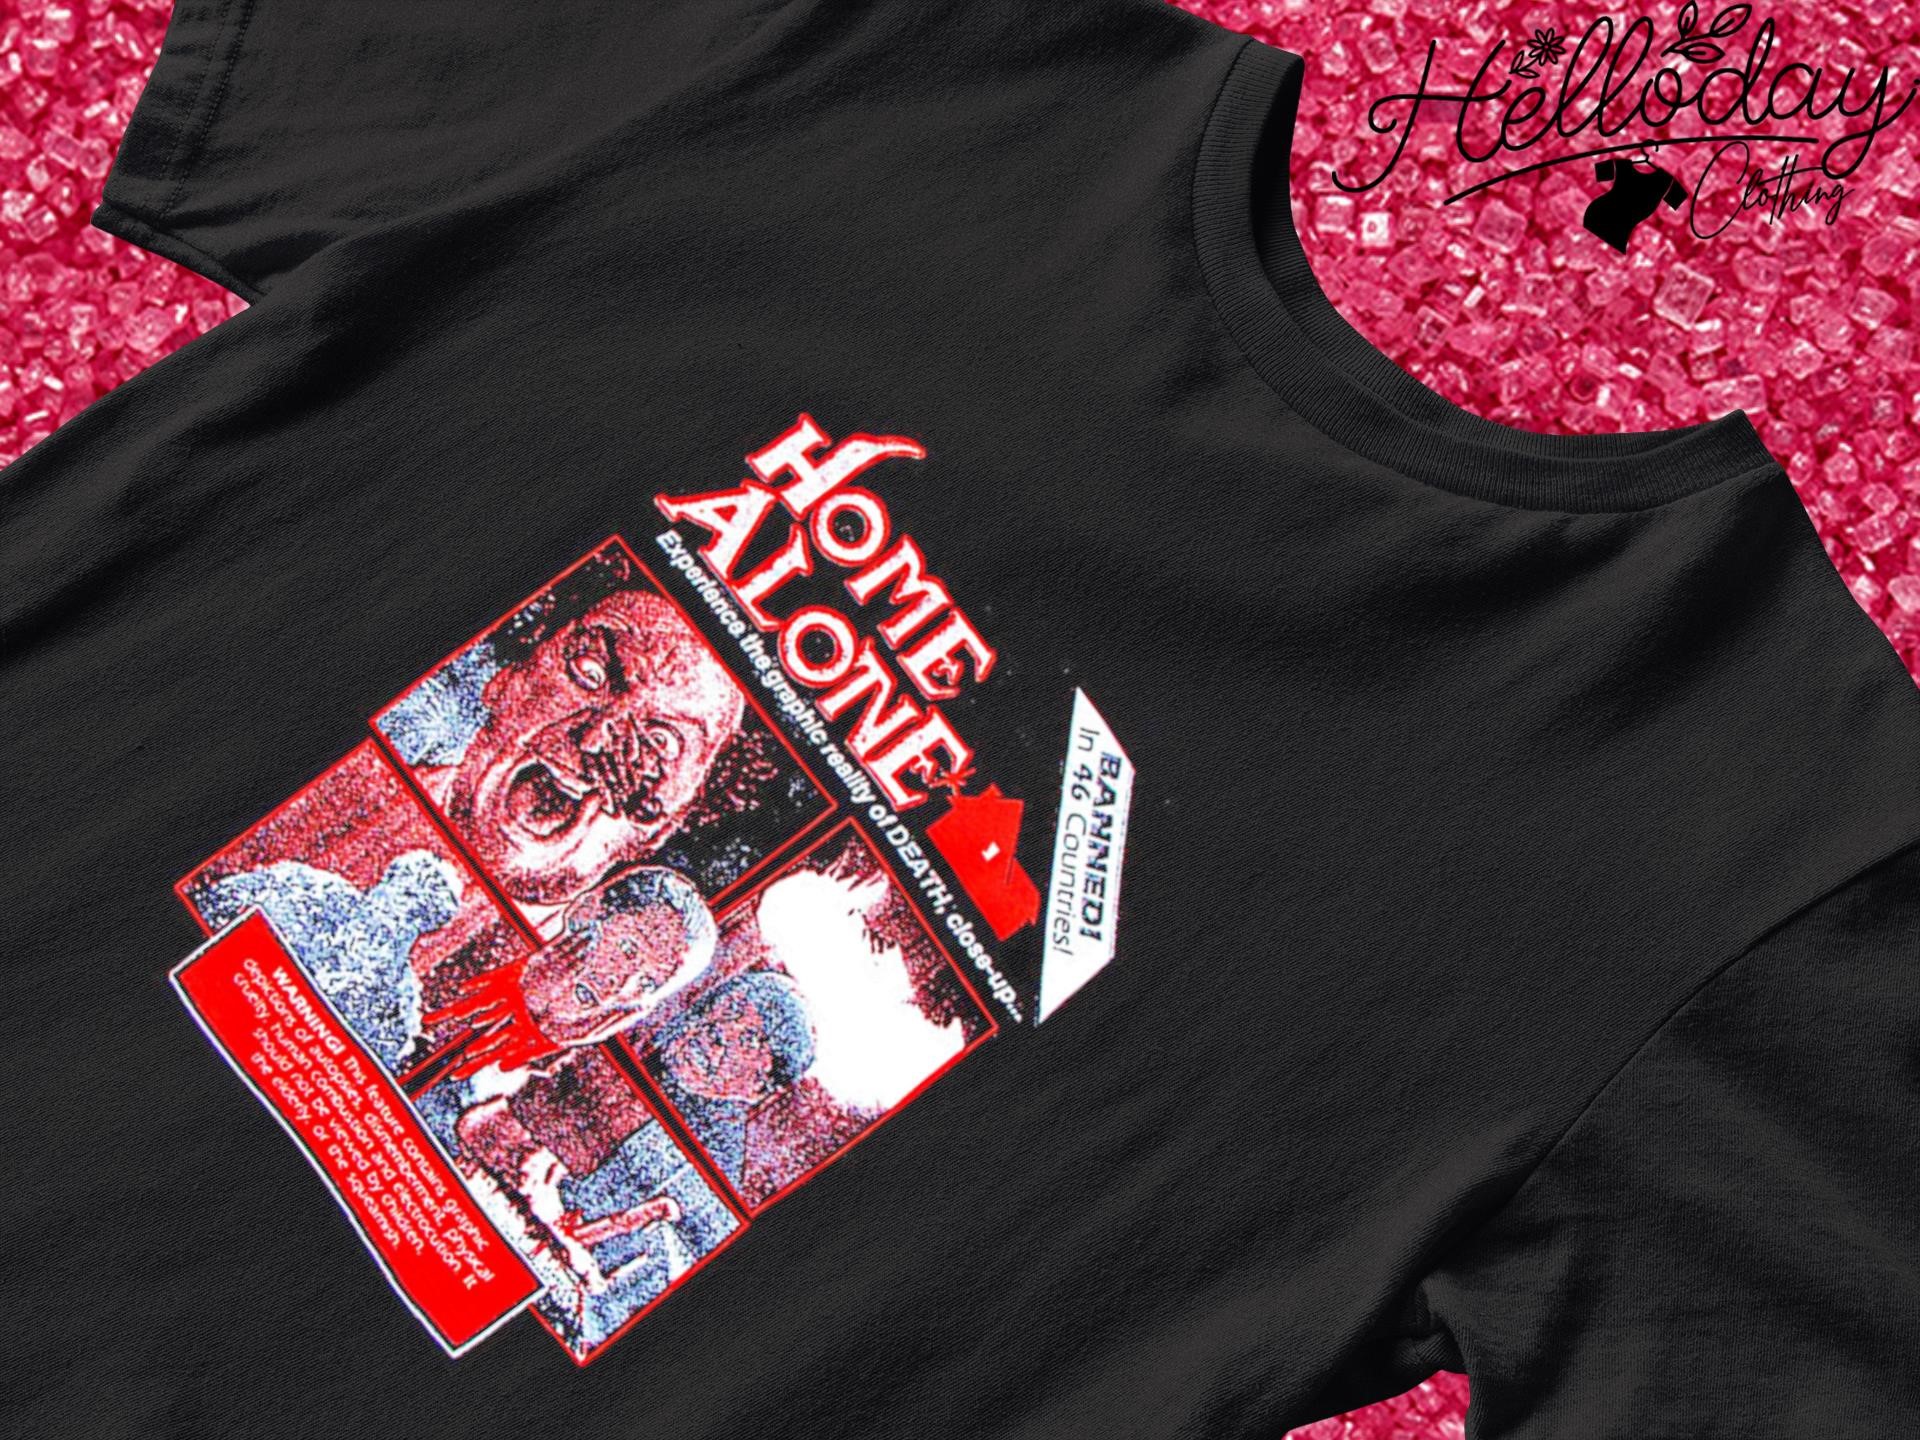 Home Alone experience the graphic reality of death shirt